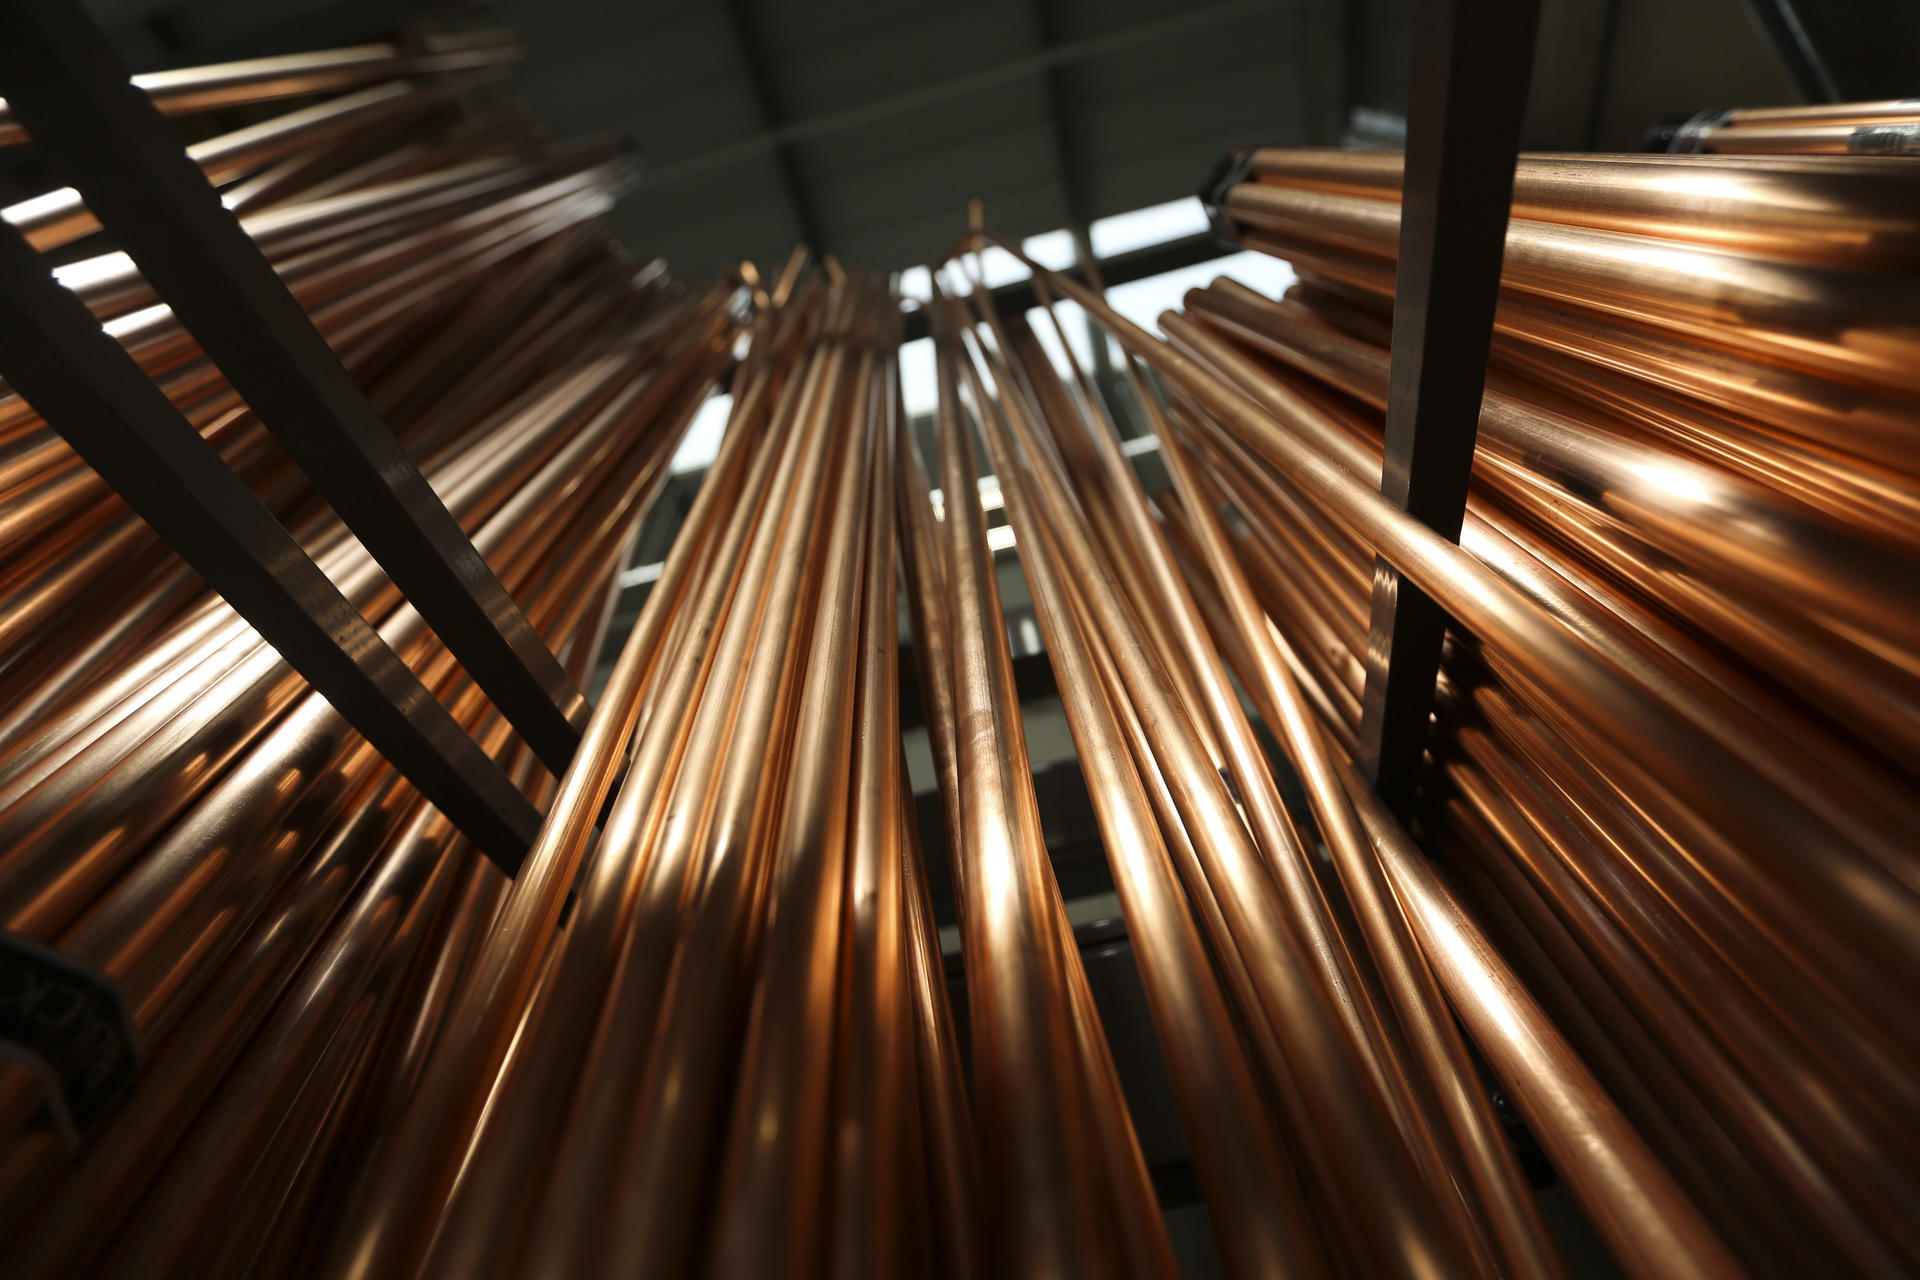 Refined copper imports fell for a second month in June to a 13-month low amid an investigation into the Qingdao scandal. Photo: Bloomberg